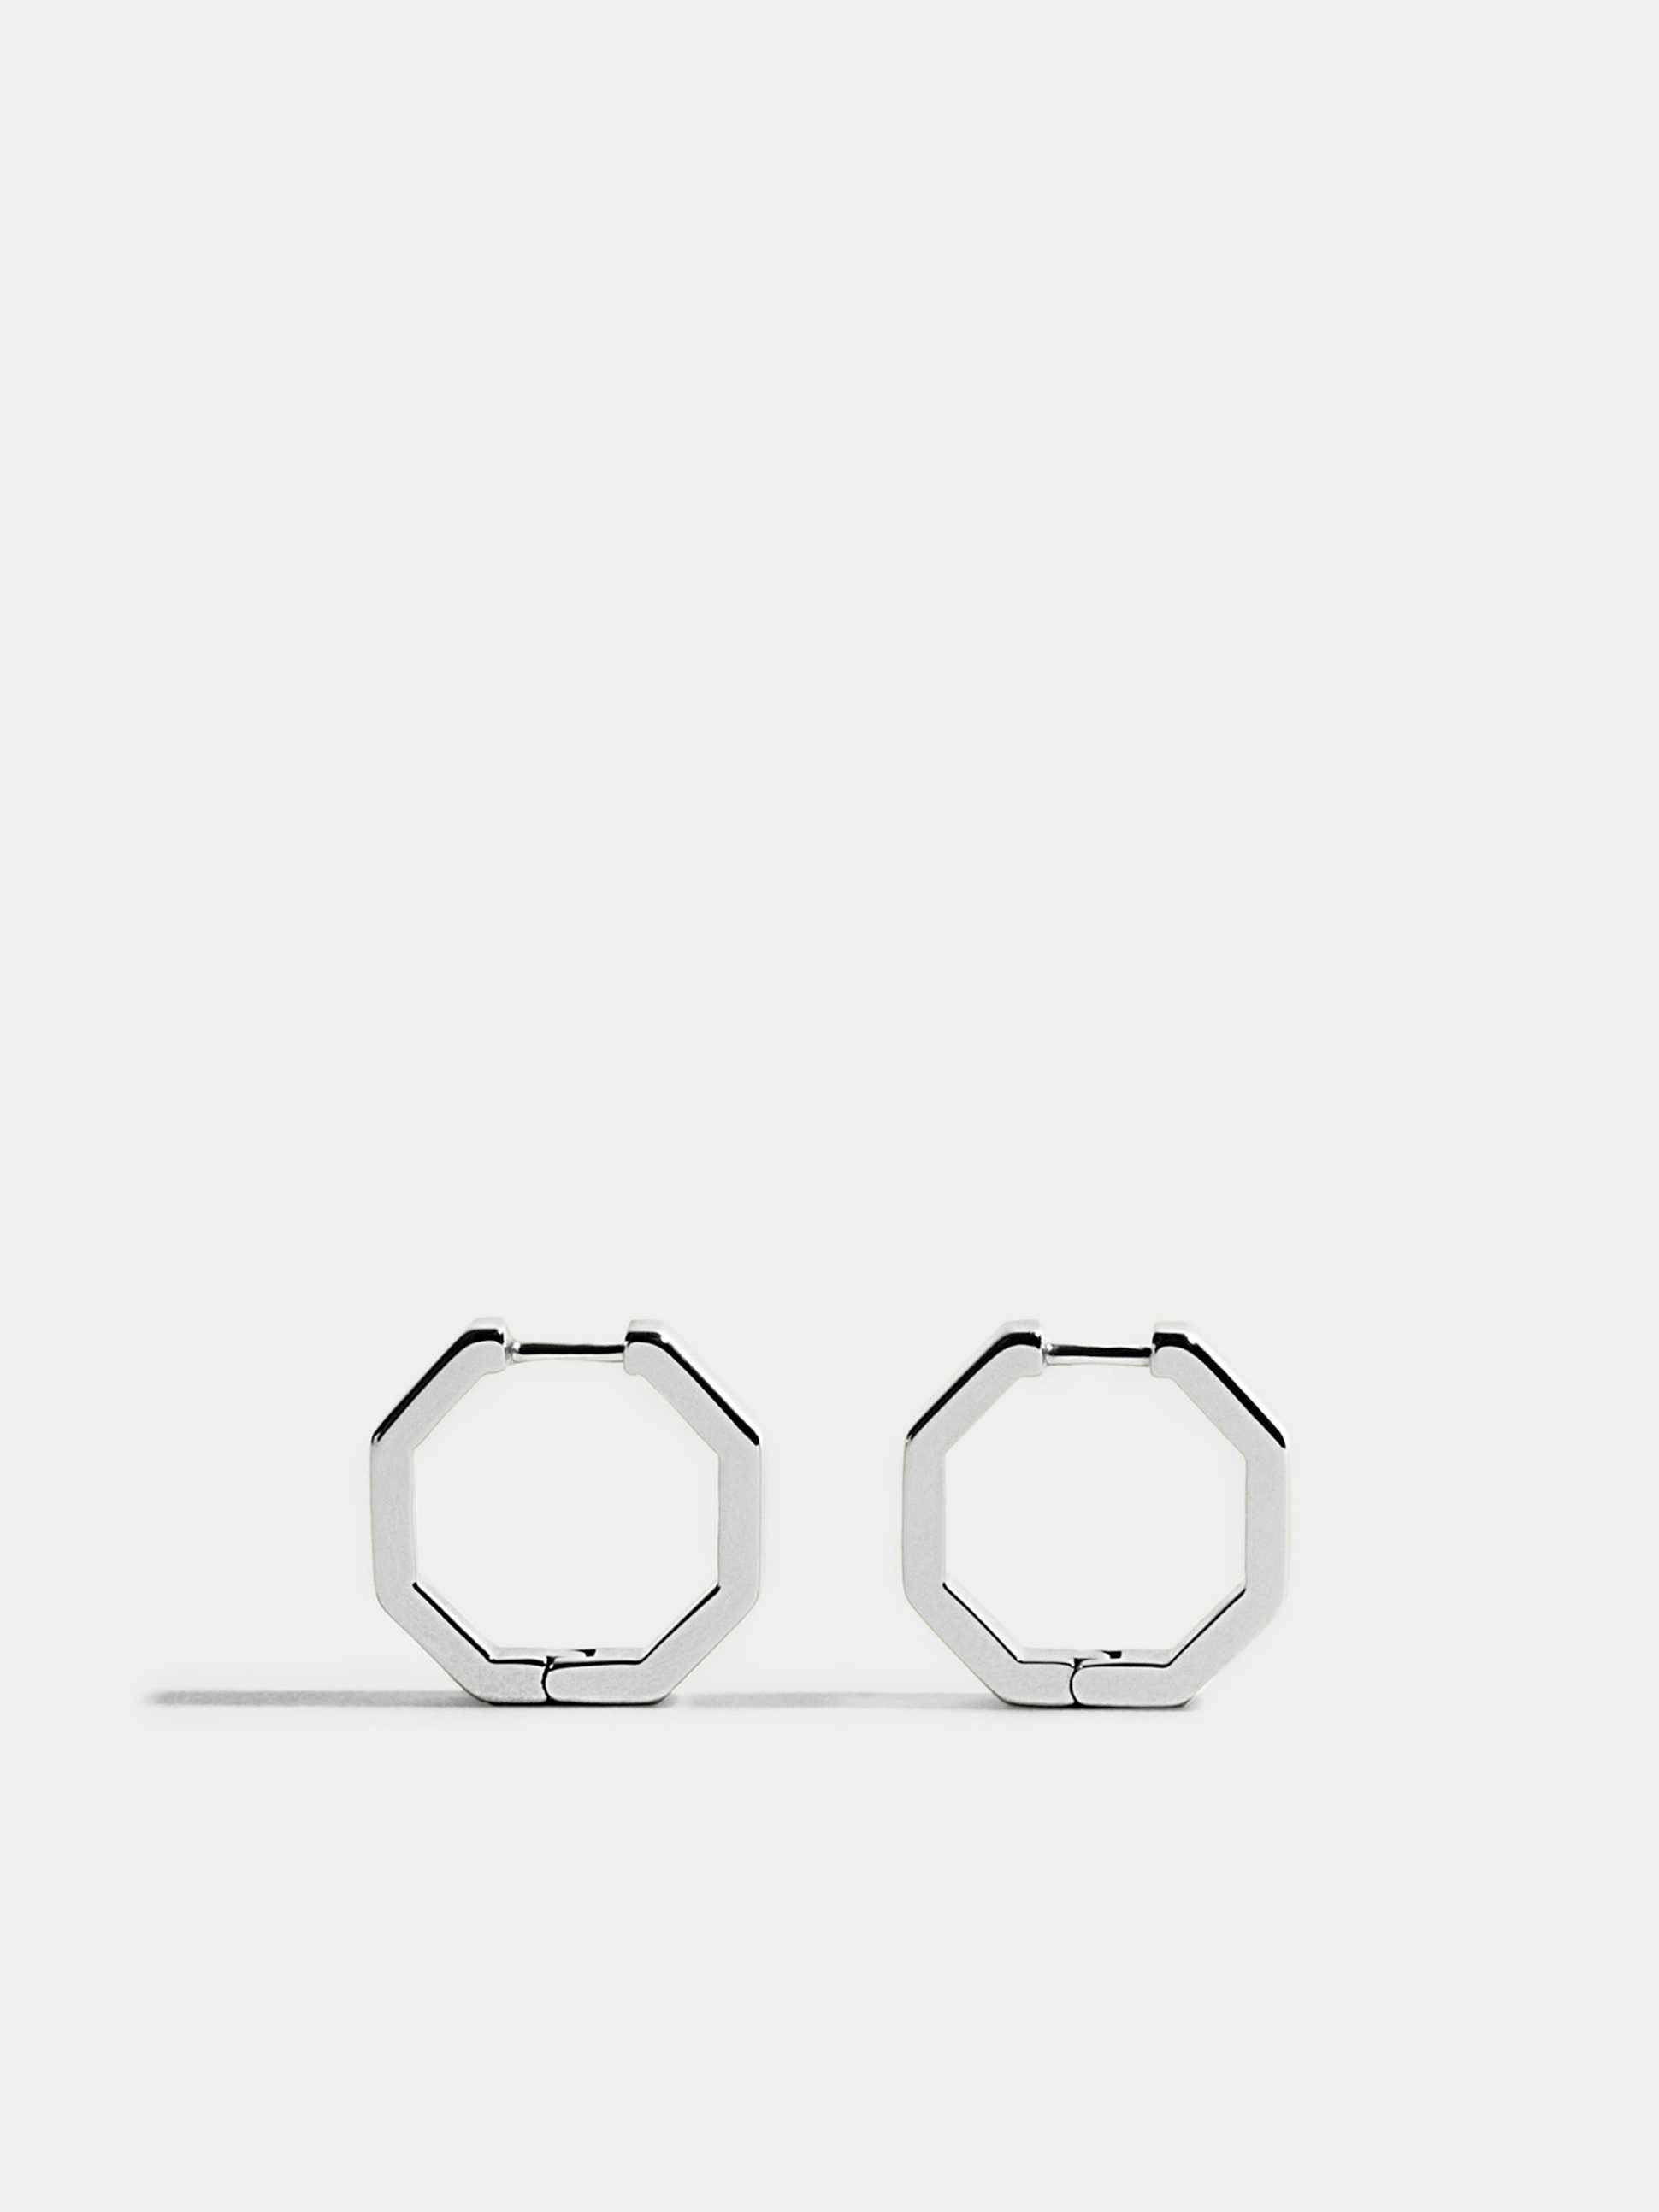 Octogone 13mm earrings in 18k Fairmined ethical white gold, the pair.